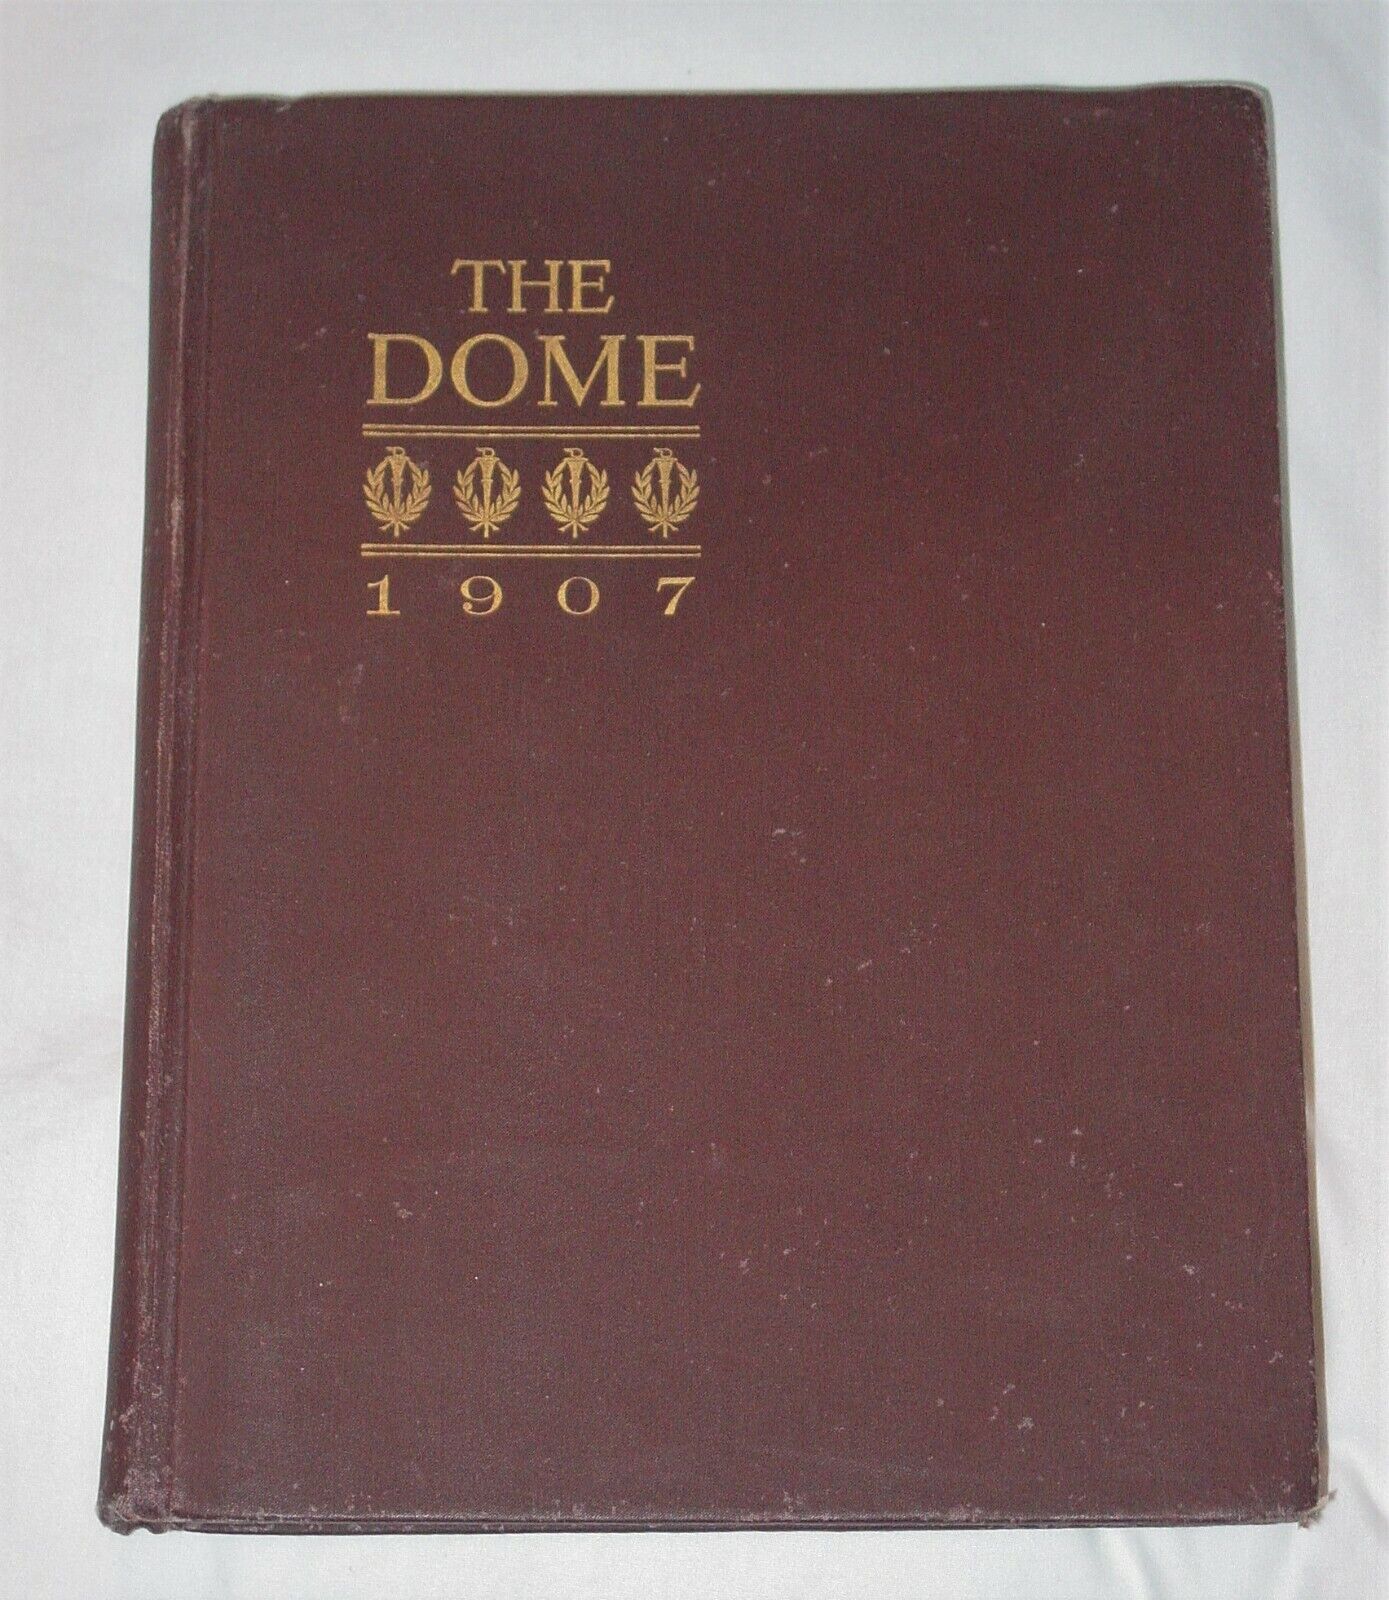 RARE ANTIQUE 1907 NOTRE DAME YEARBOOK - 2ND EDITION -THE DOME